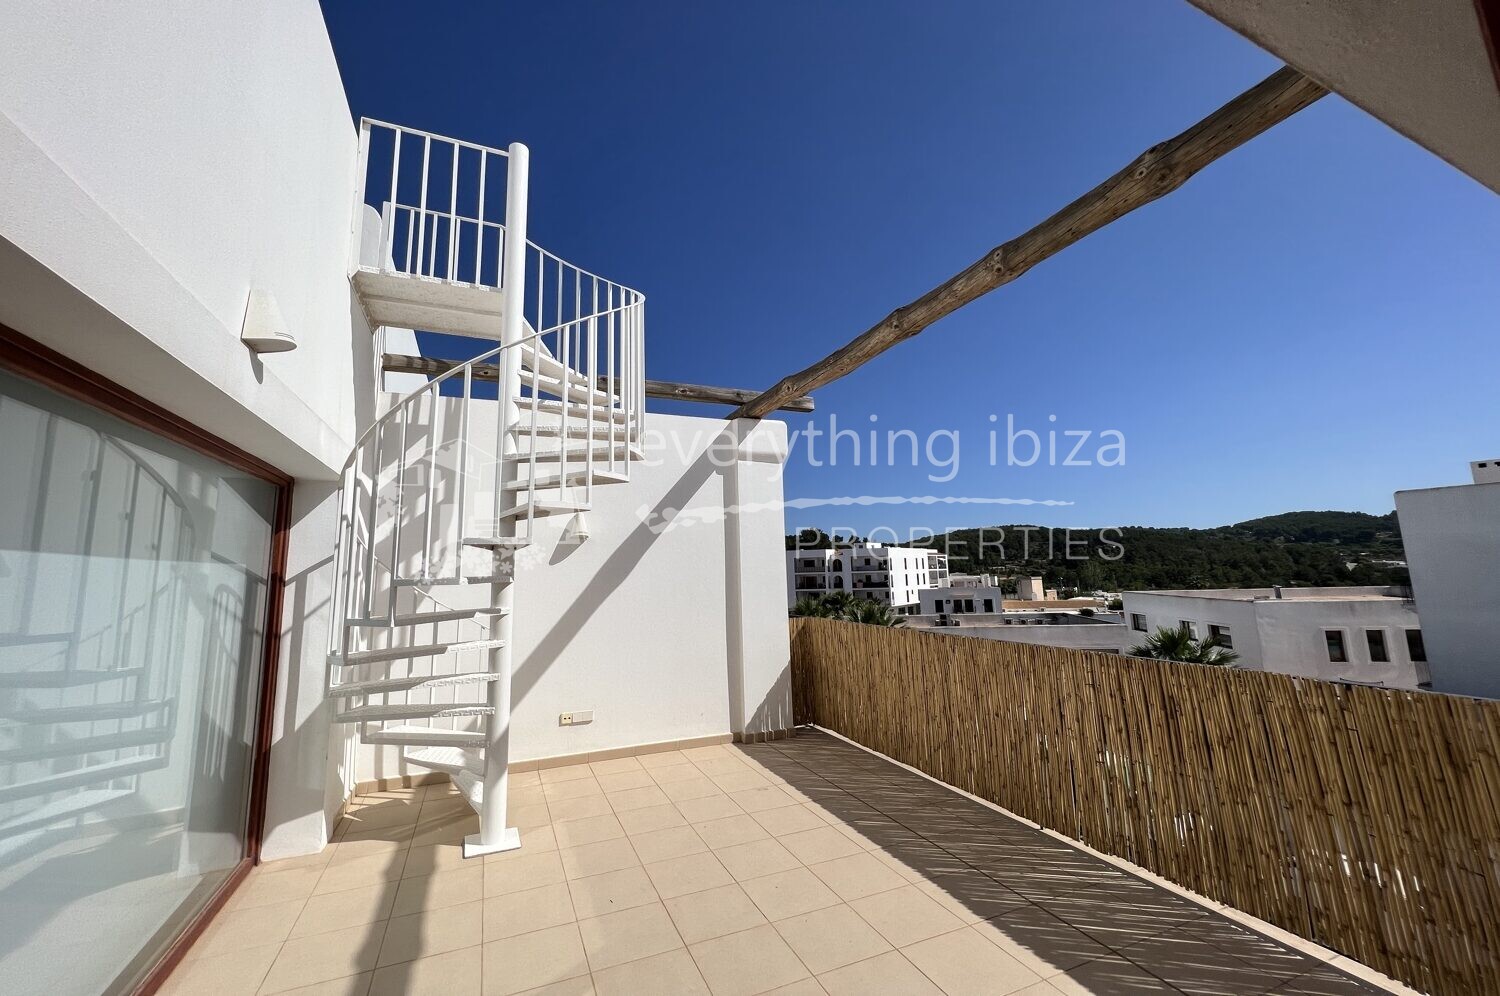 Magnificent Luxury Townhouse in Central Sant Josep Village, ref. 1461, for sale in Ibiza by everything ibiza Properties